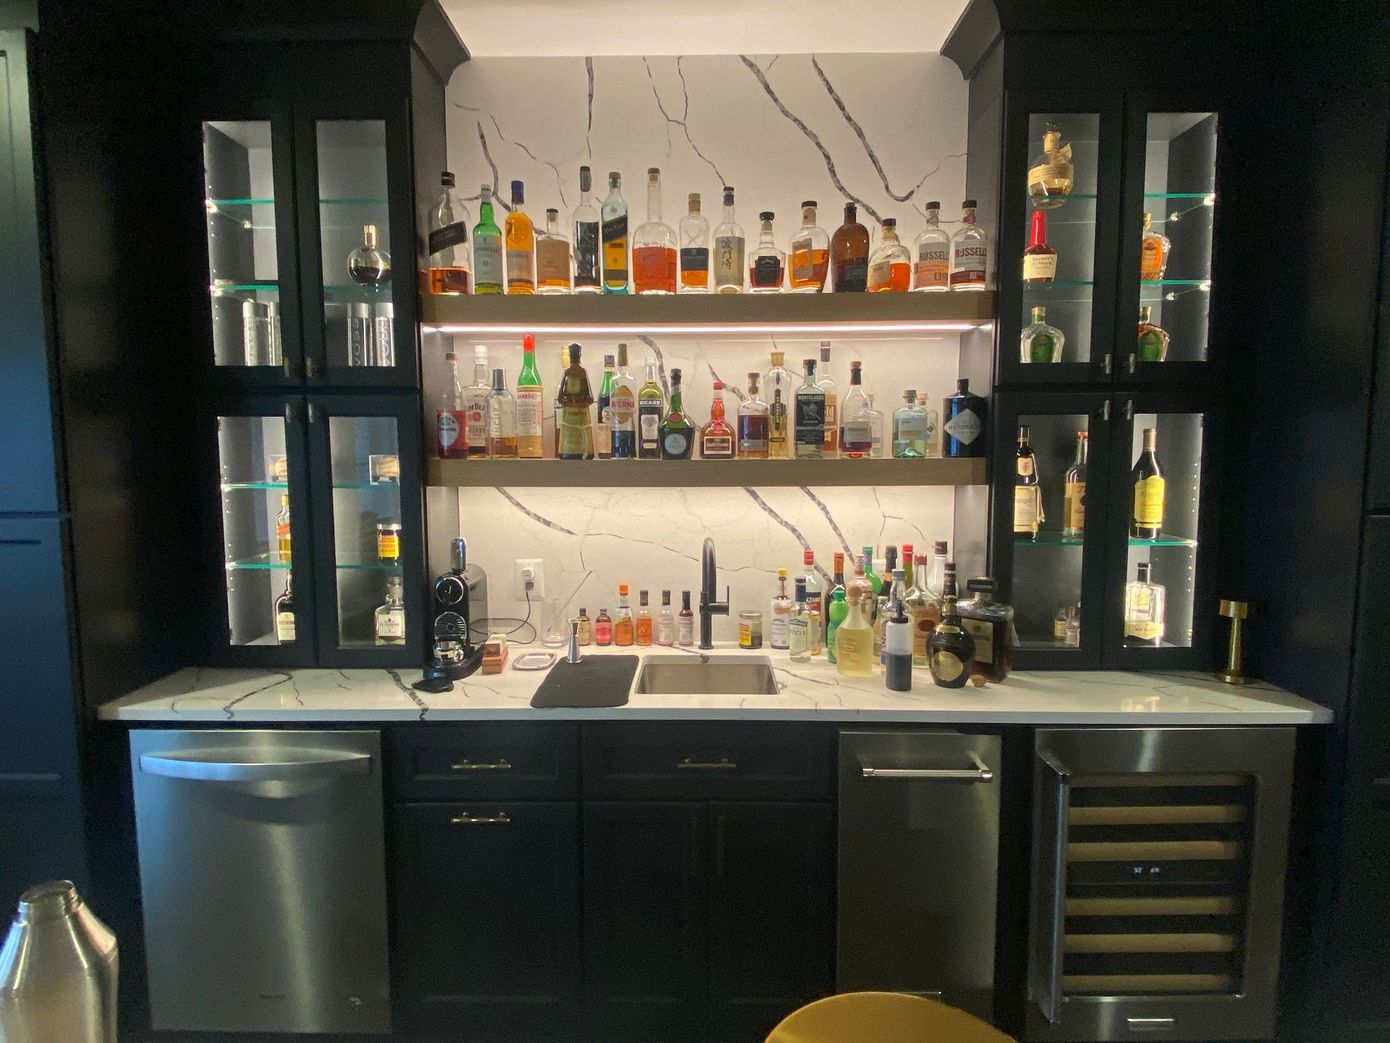 A kitchen with a bar and lots of bottles on shelves.